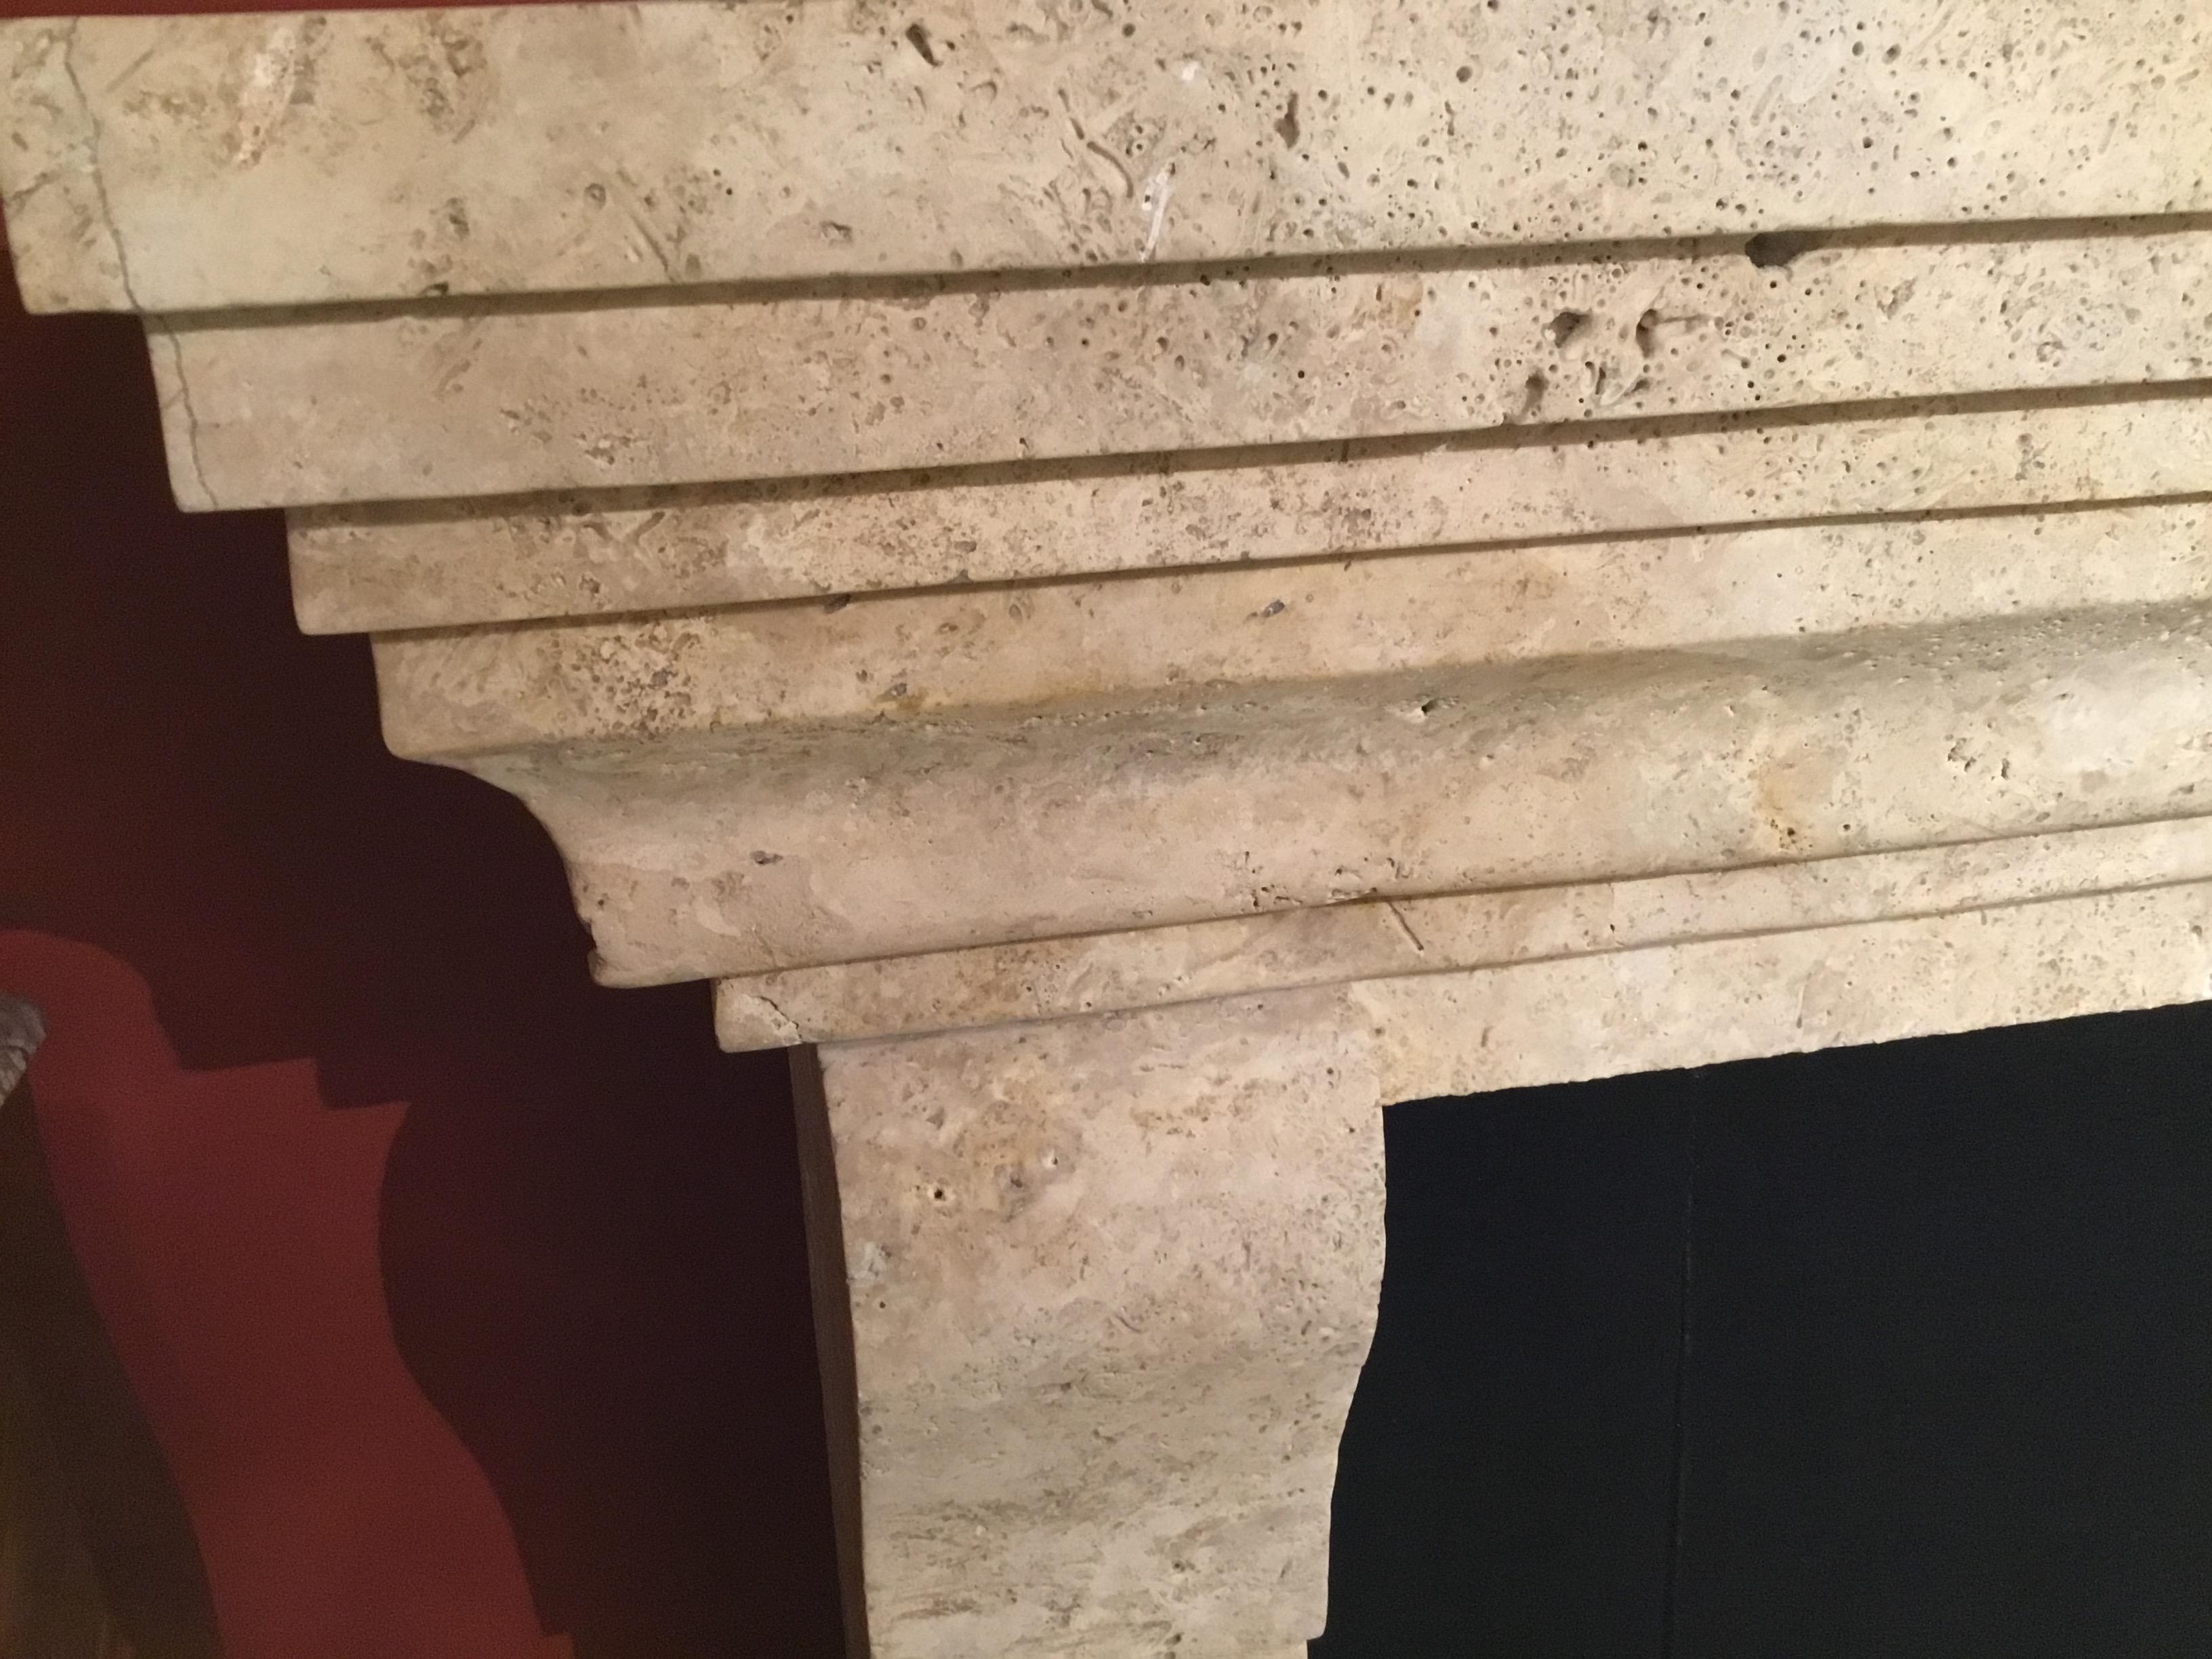 Handsome travertine mantel with curved side legs and a stacked look at the top
Of this interesting design. Great piece to use in contemporary or traditional settings.
This piece is in my gallery and ready for immediate shipment.